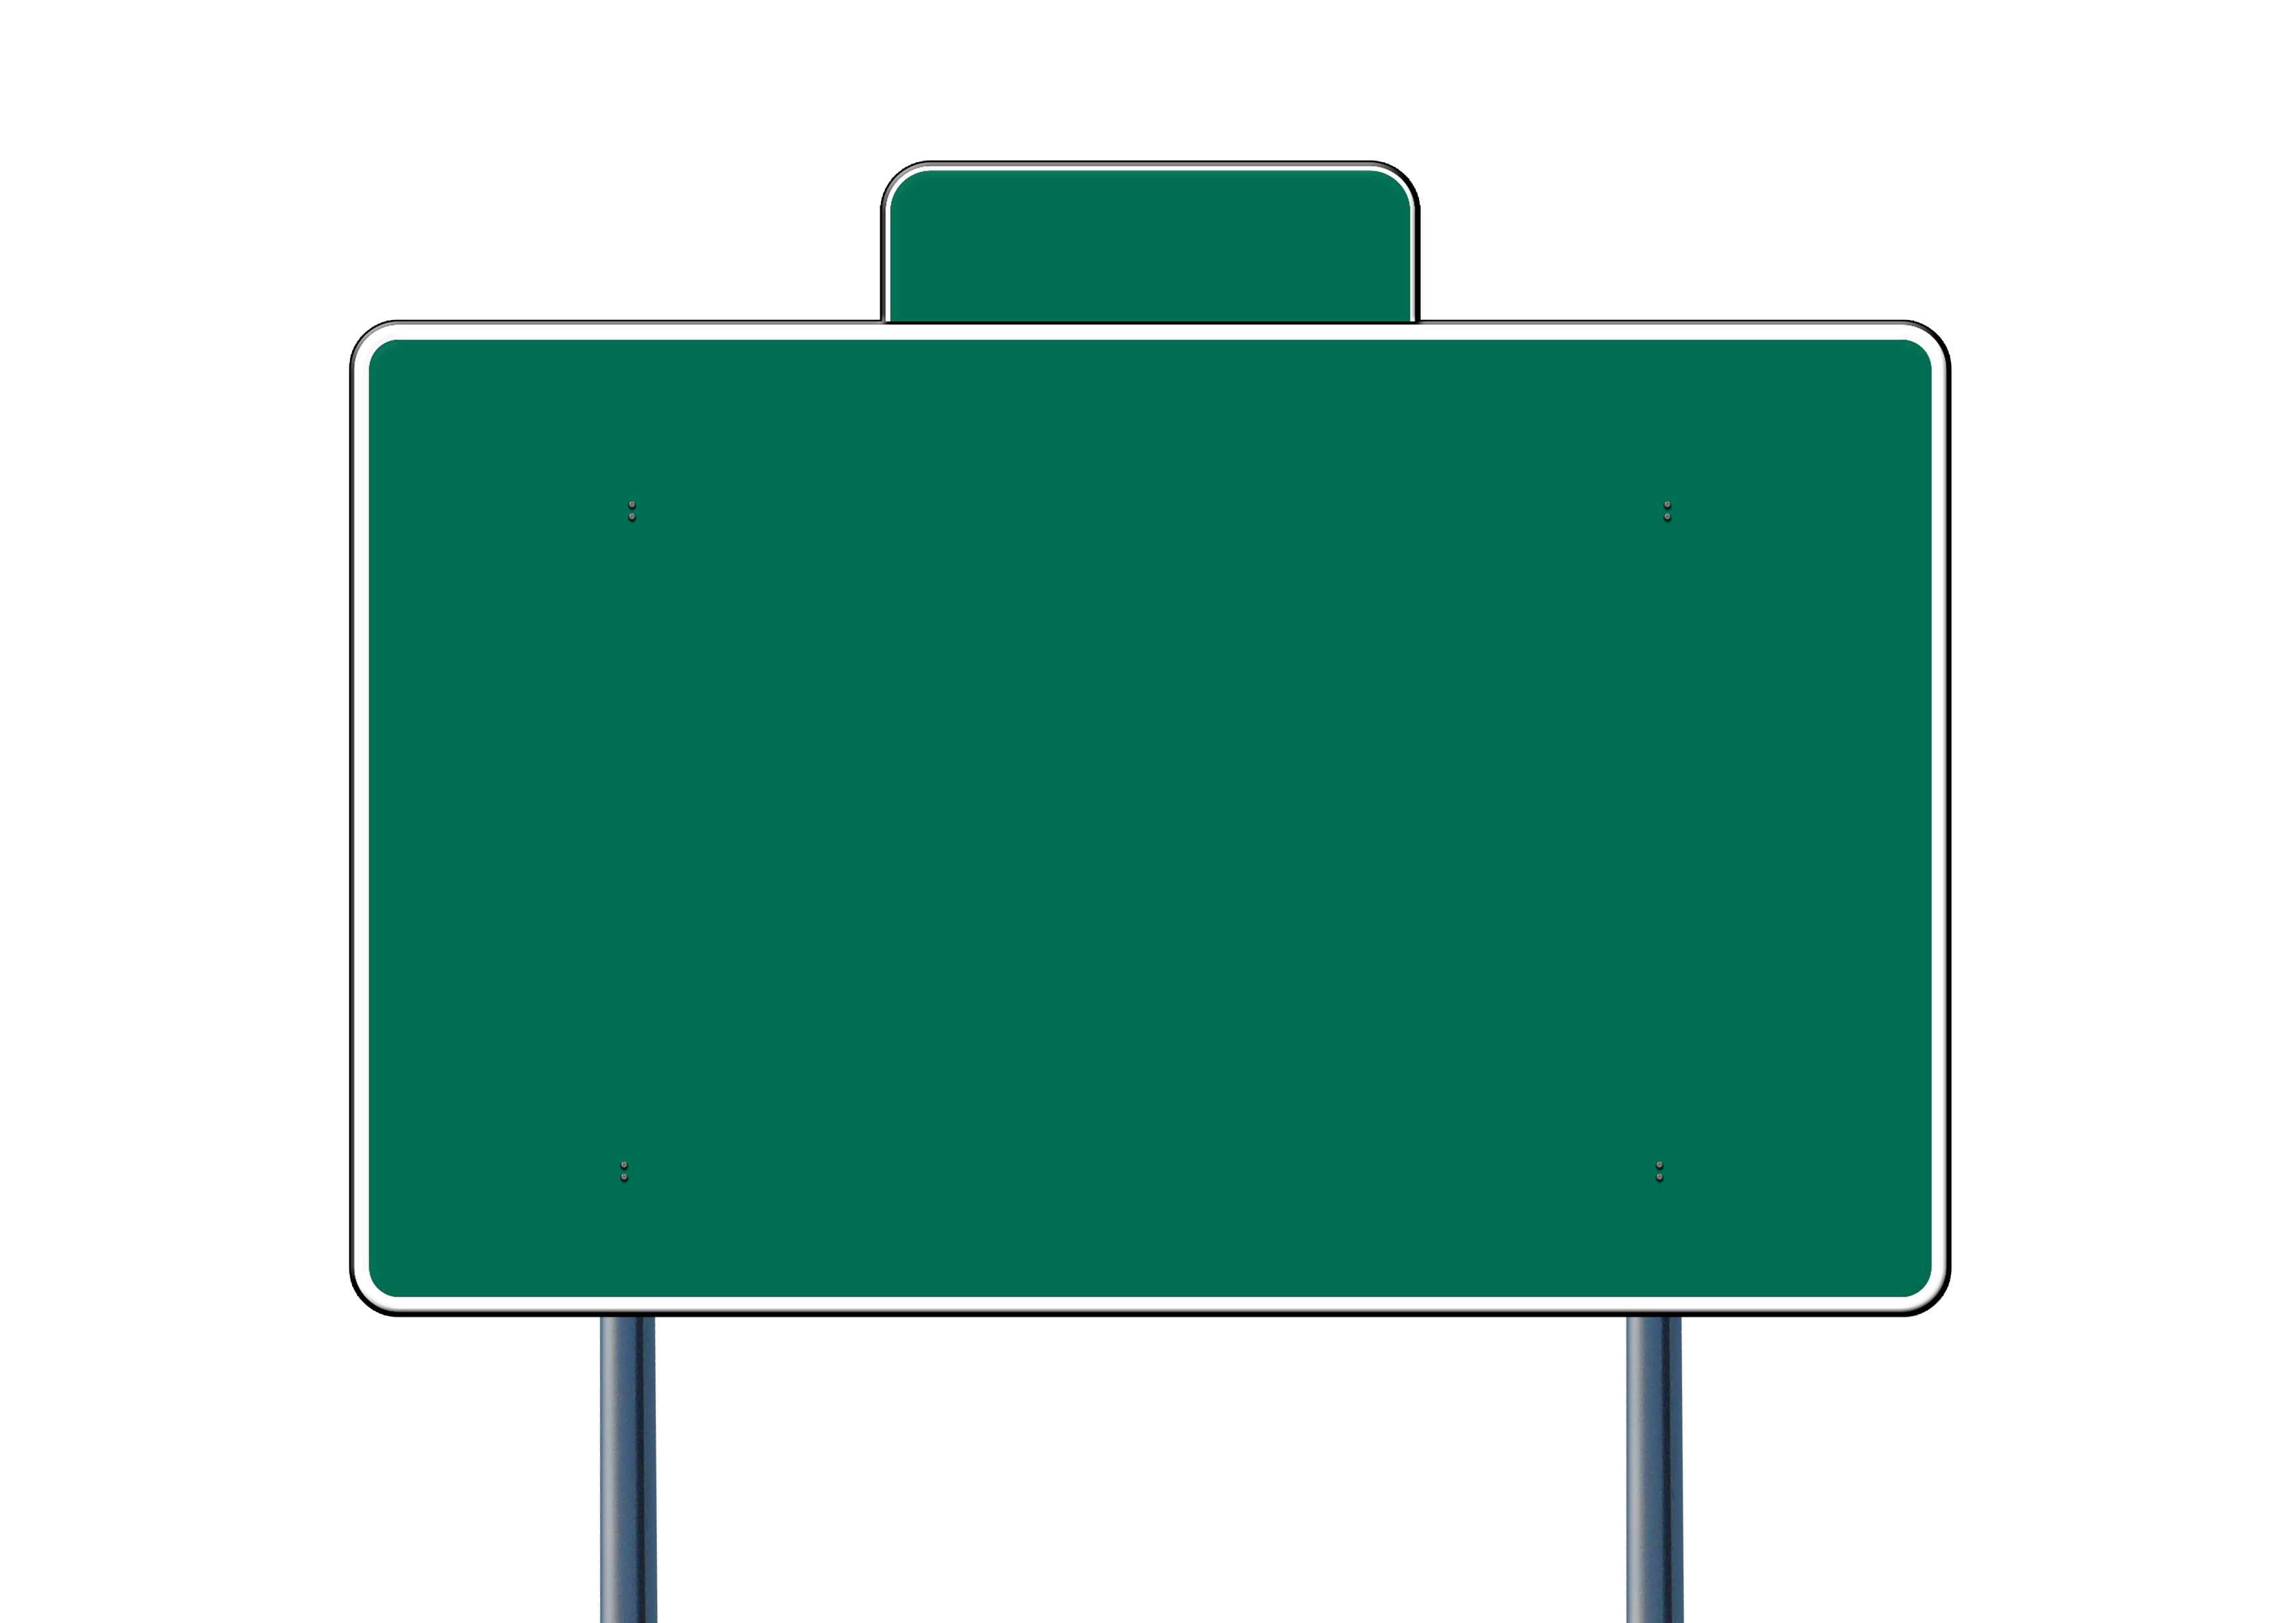 Picture of green traffic sign free image download